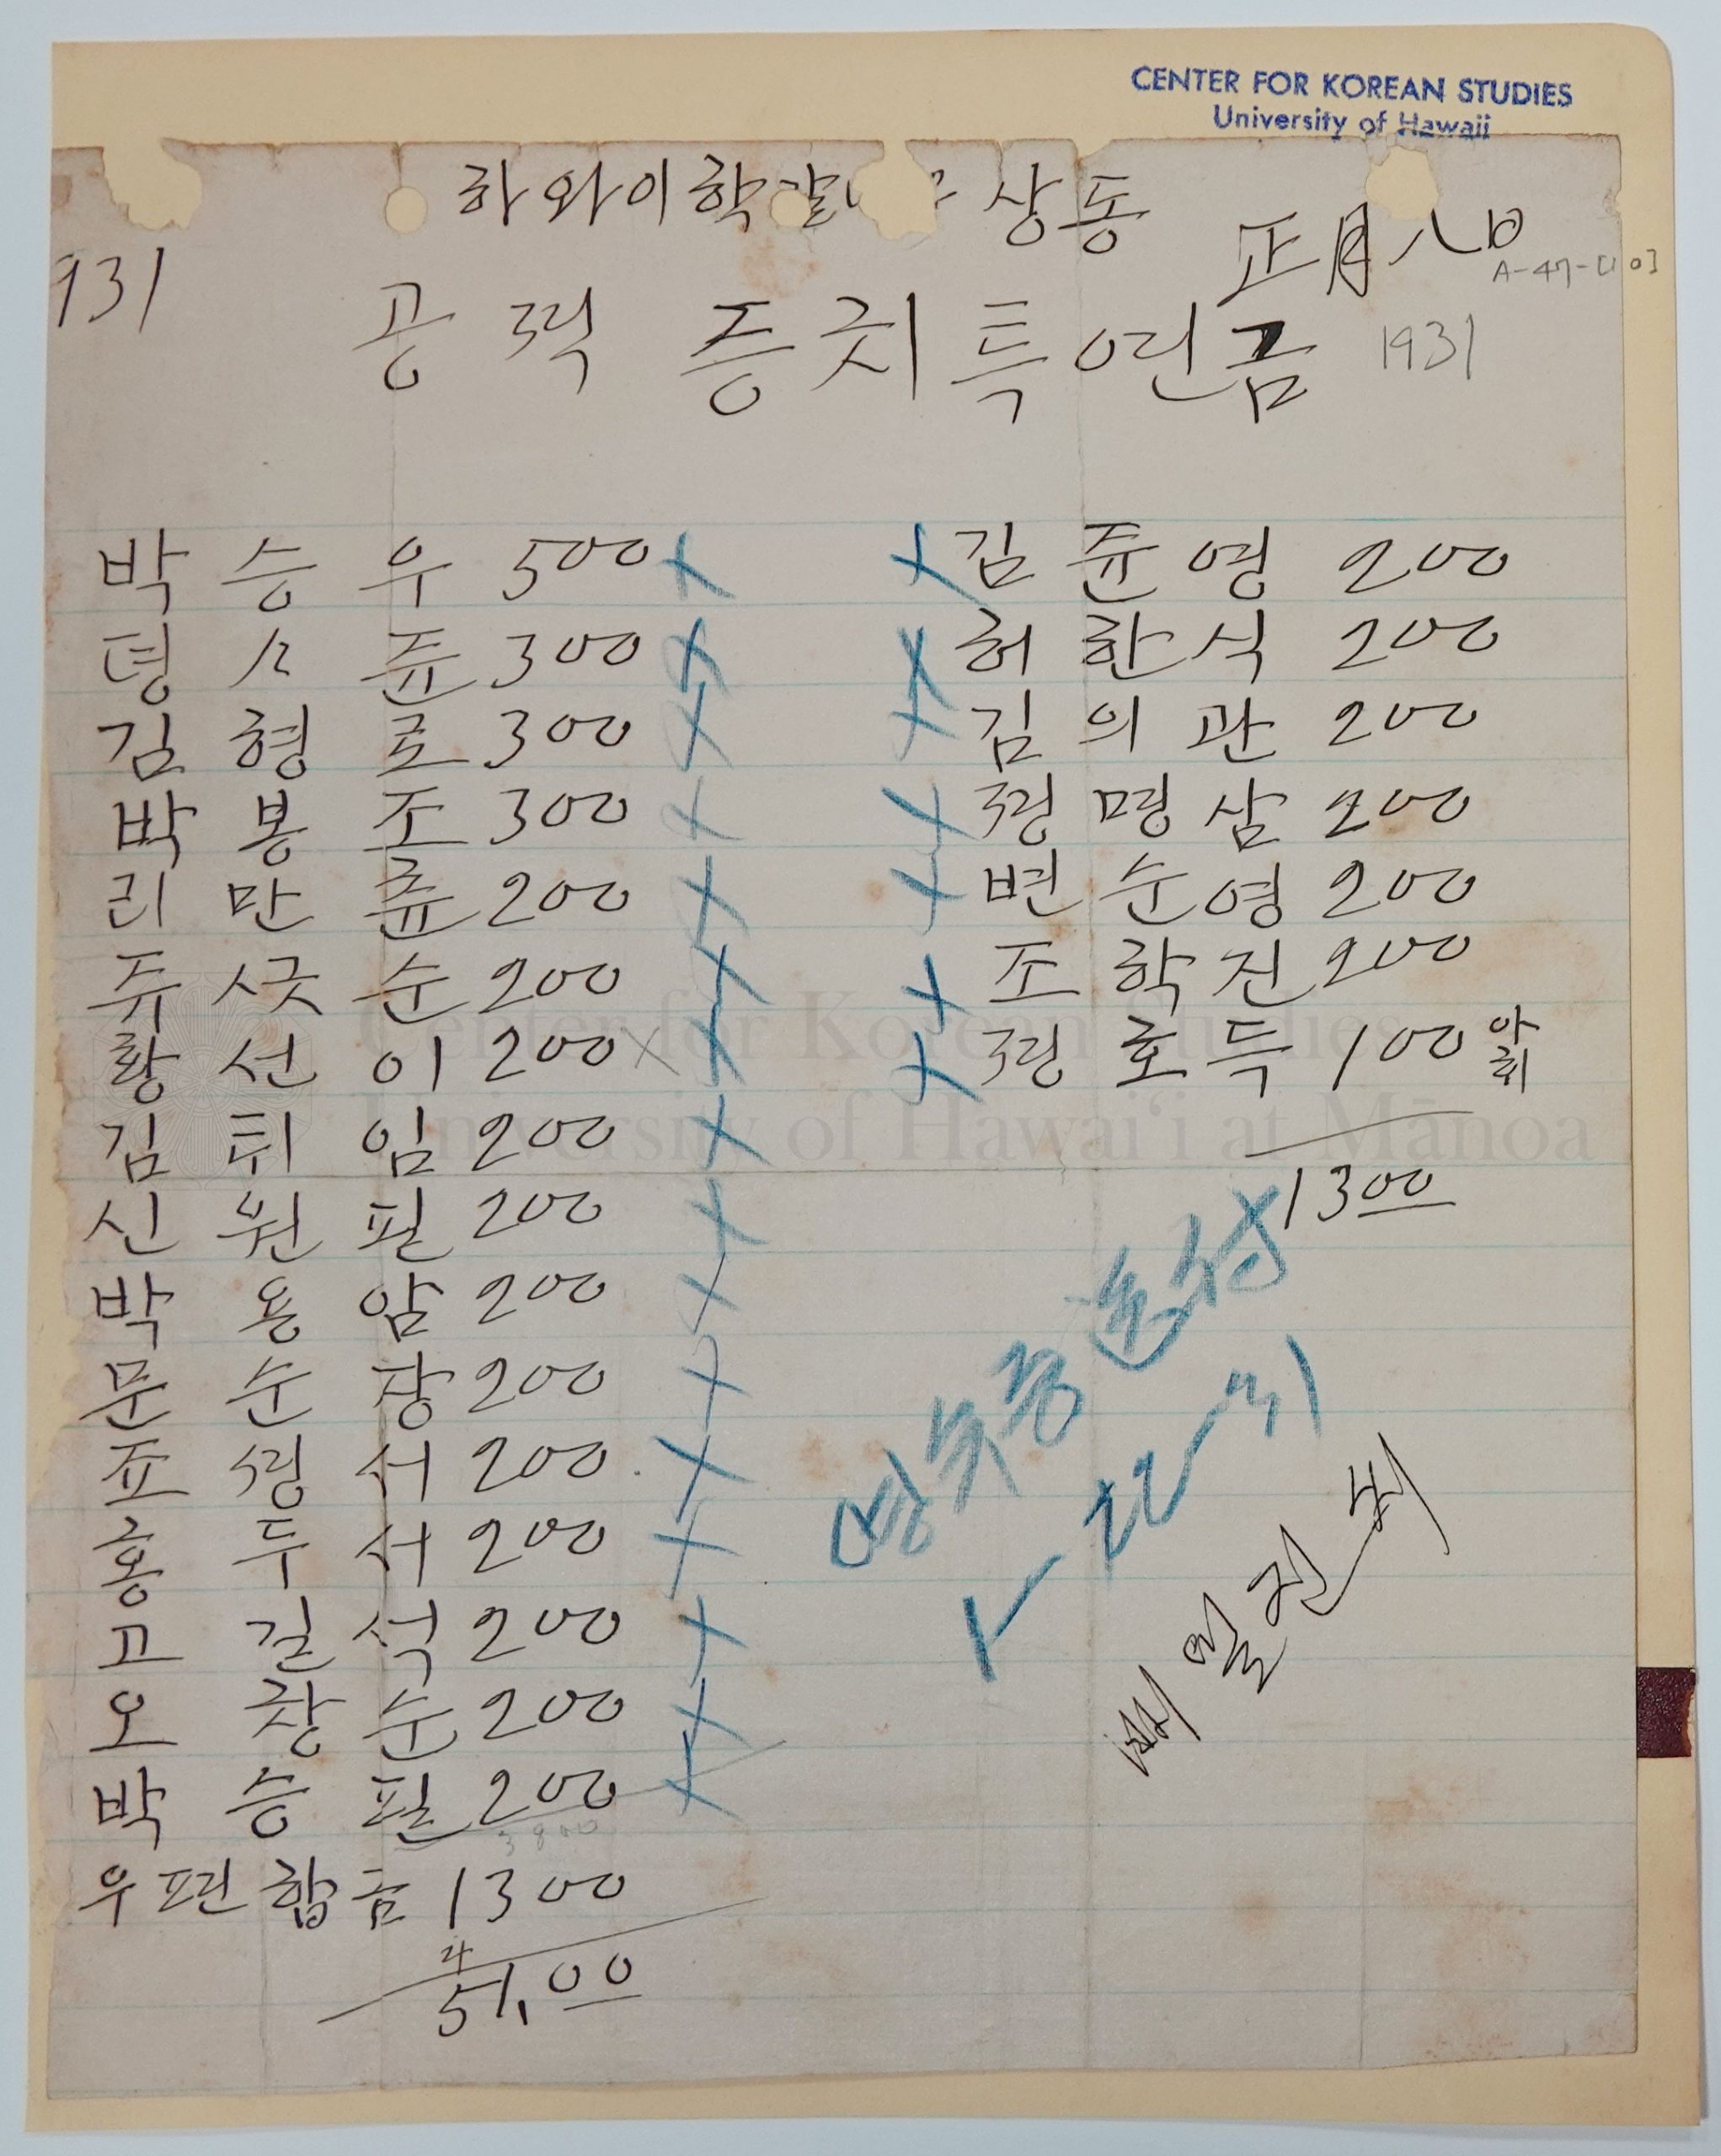 Financial record (special activity fee), 1931